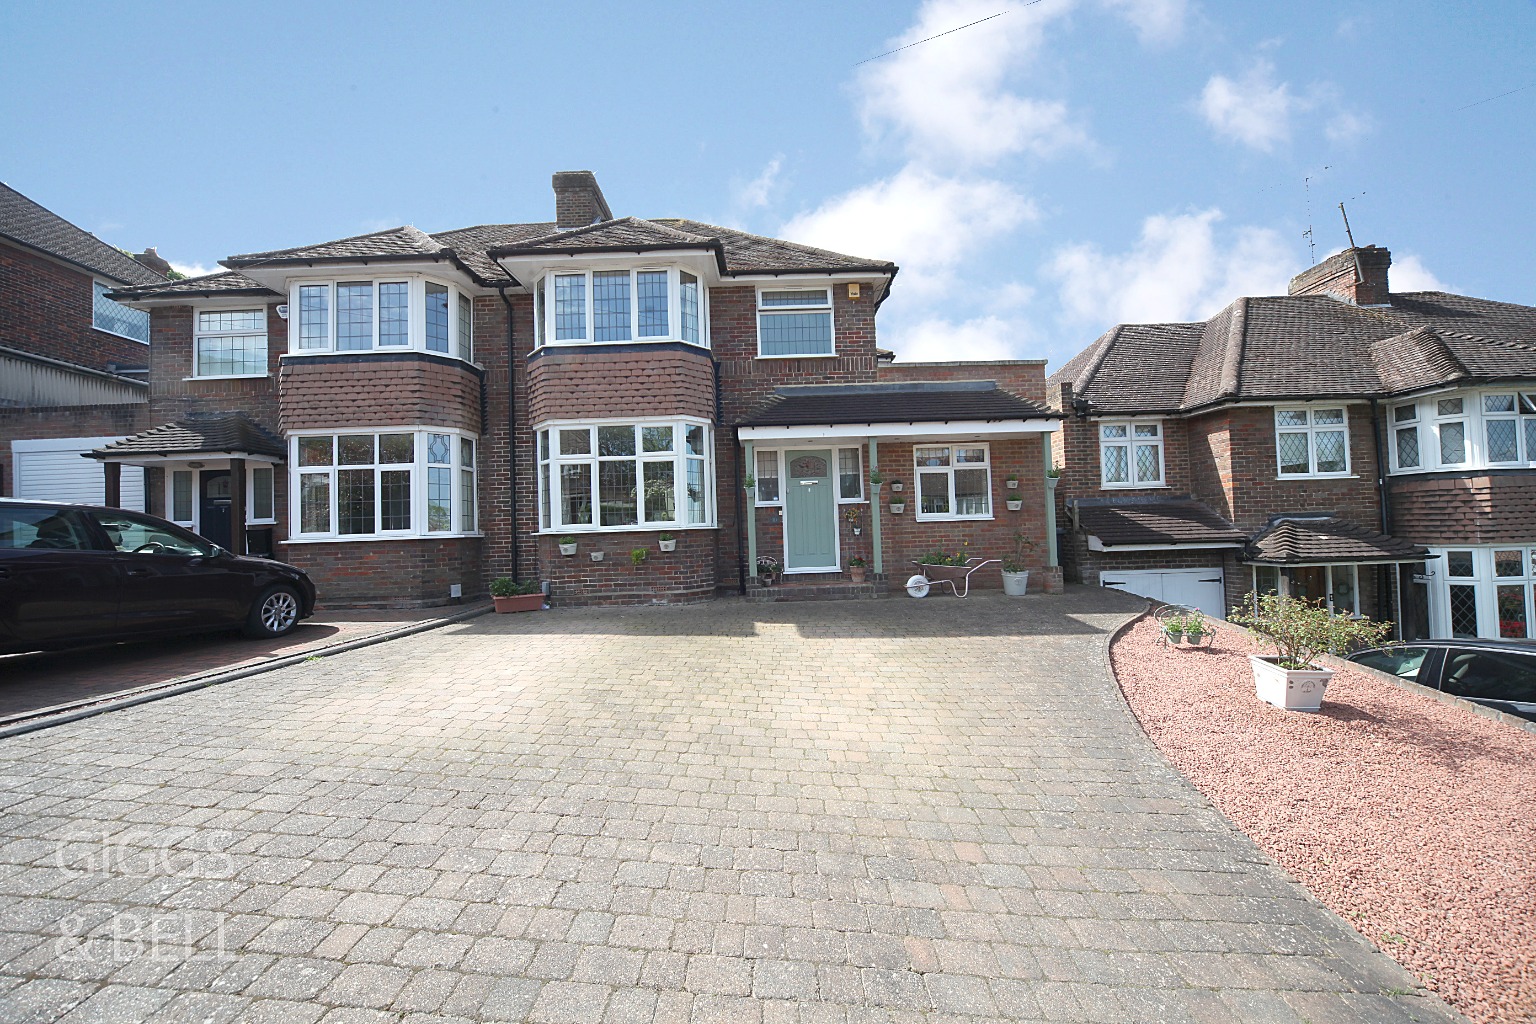 3 bed semi-detached house for sale in Knoll Rise, Luton, LU2 